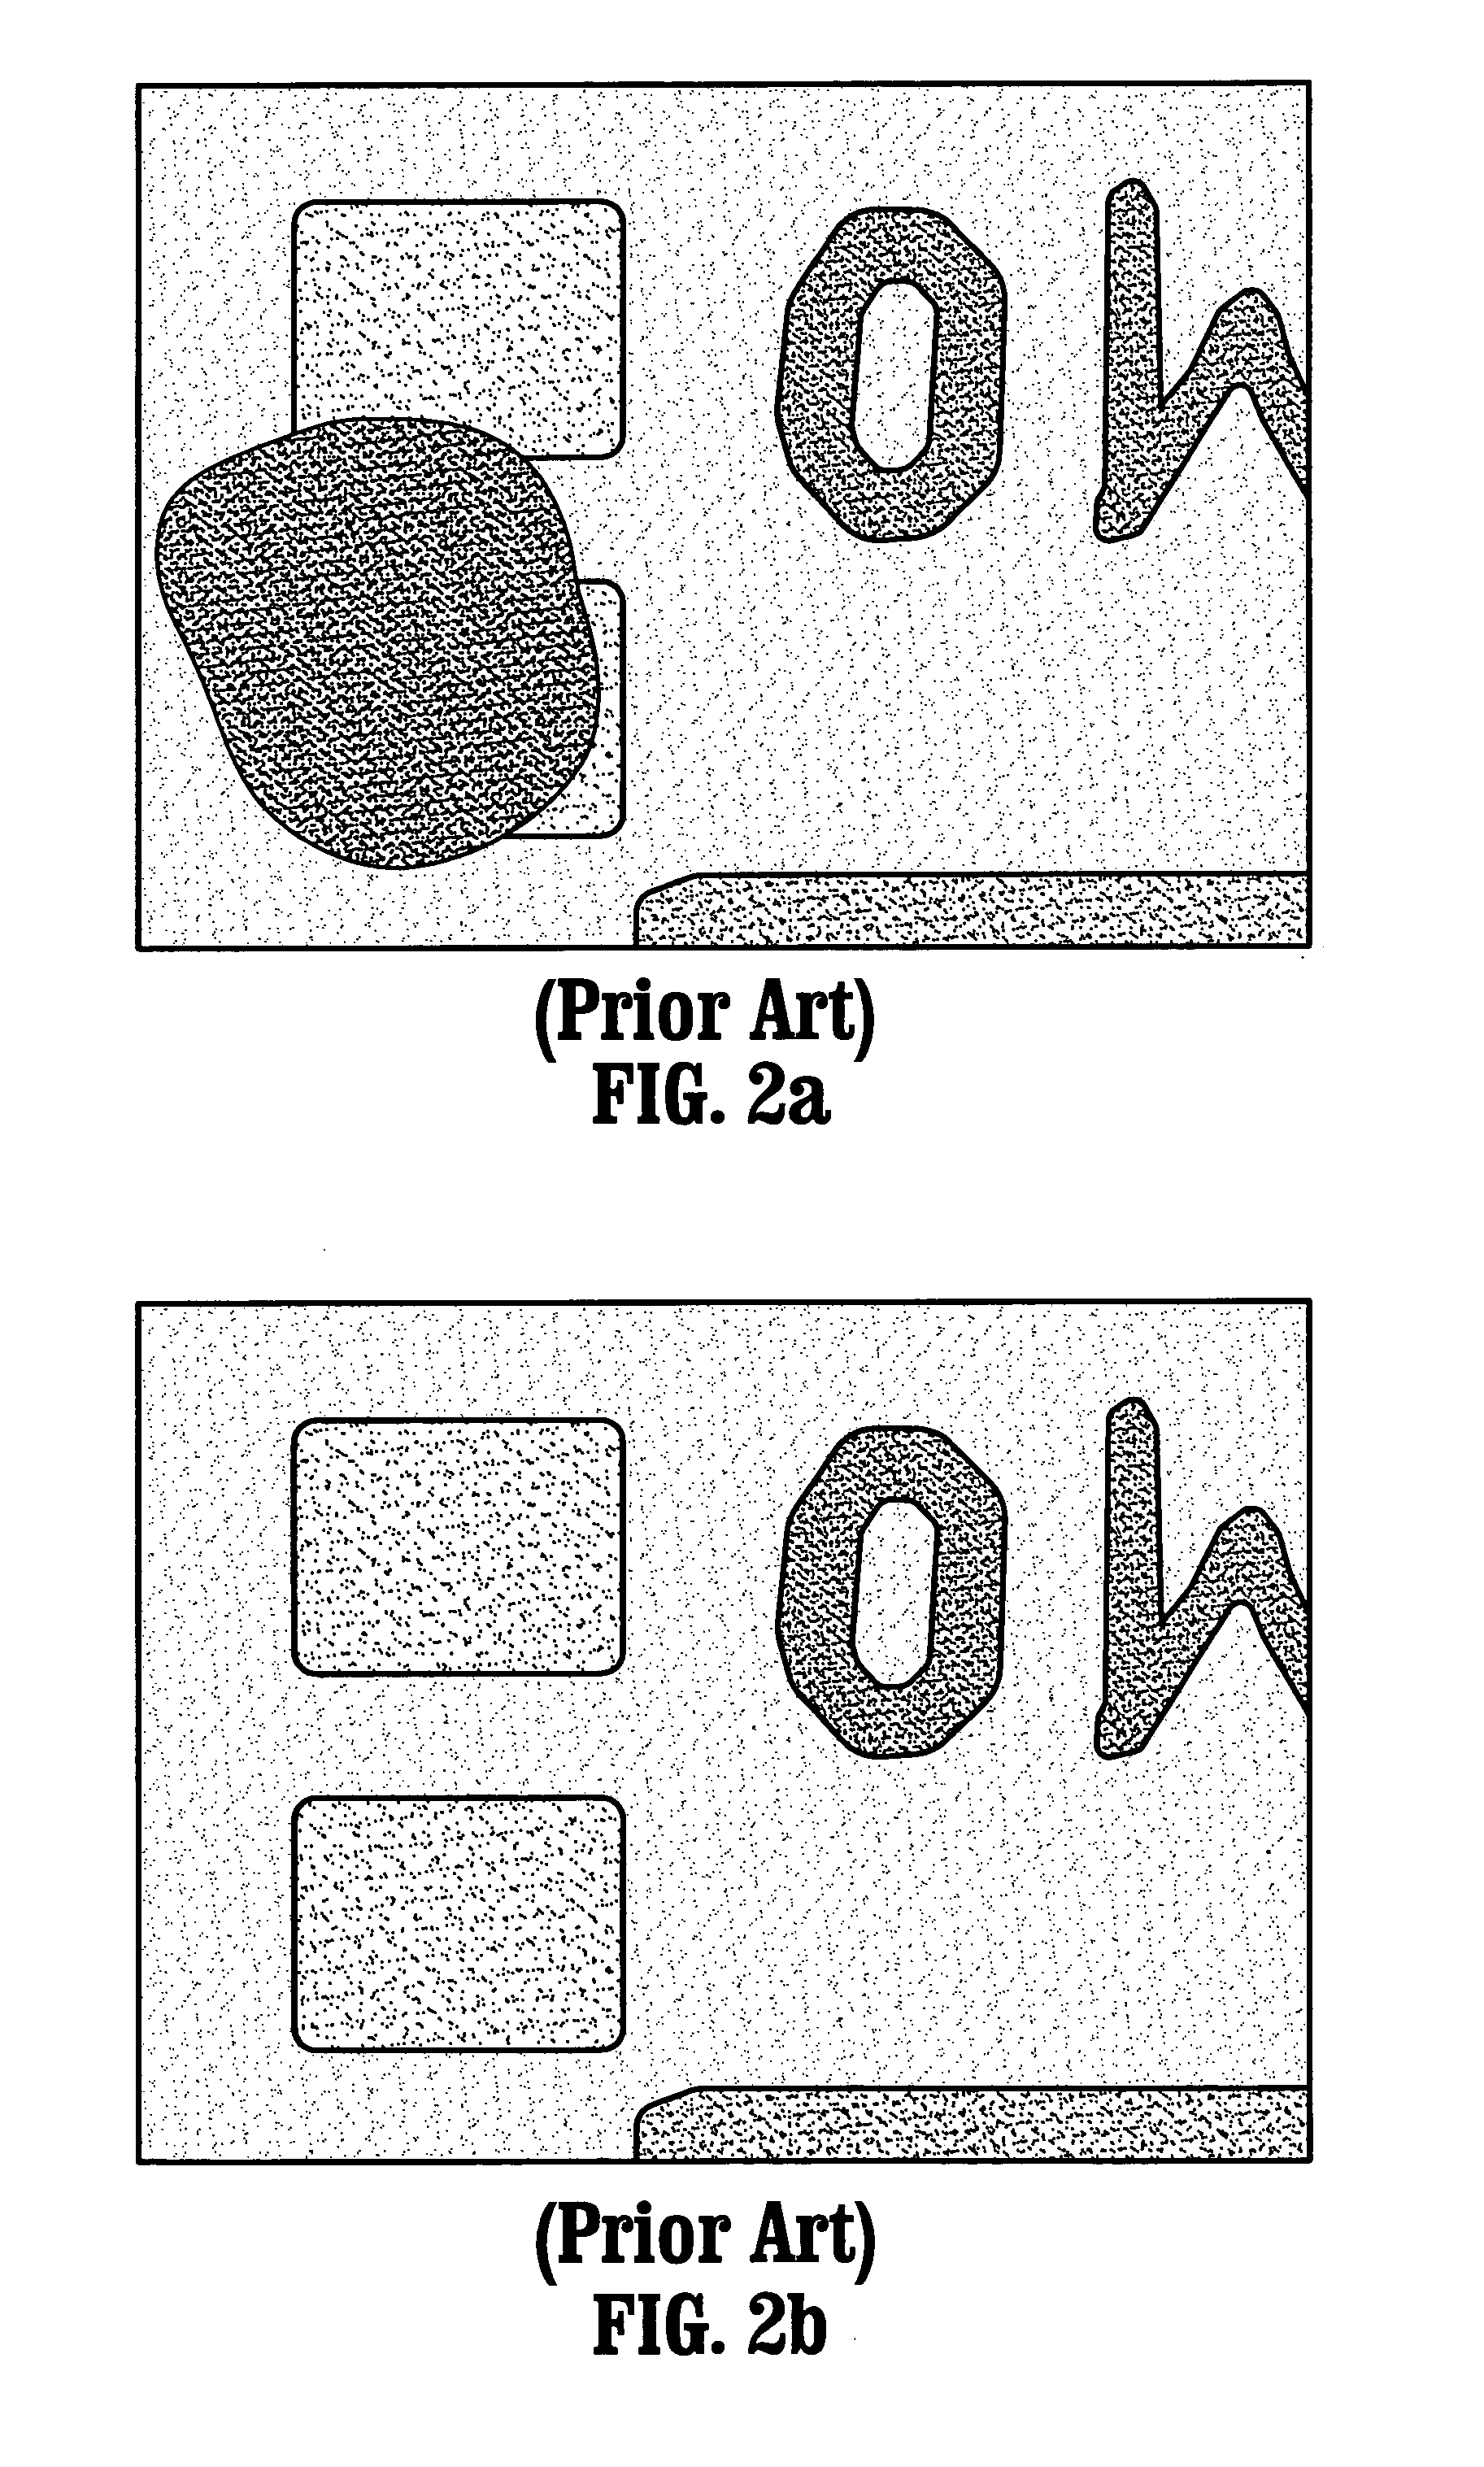 System and method for recognizing markers on printed circuit boards